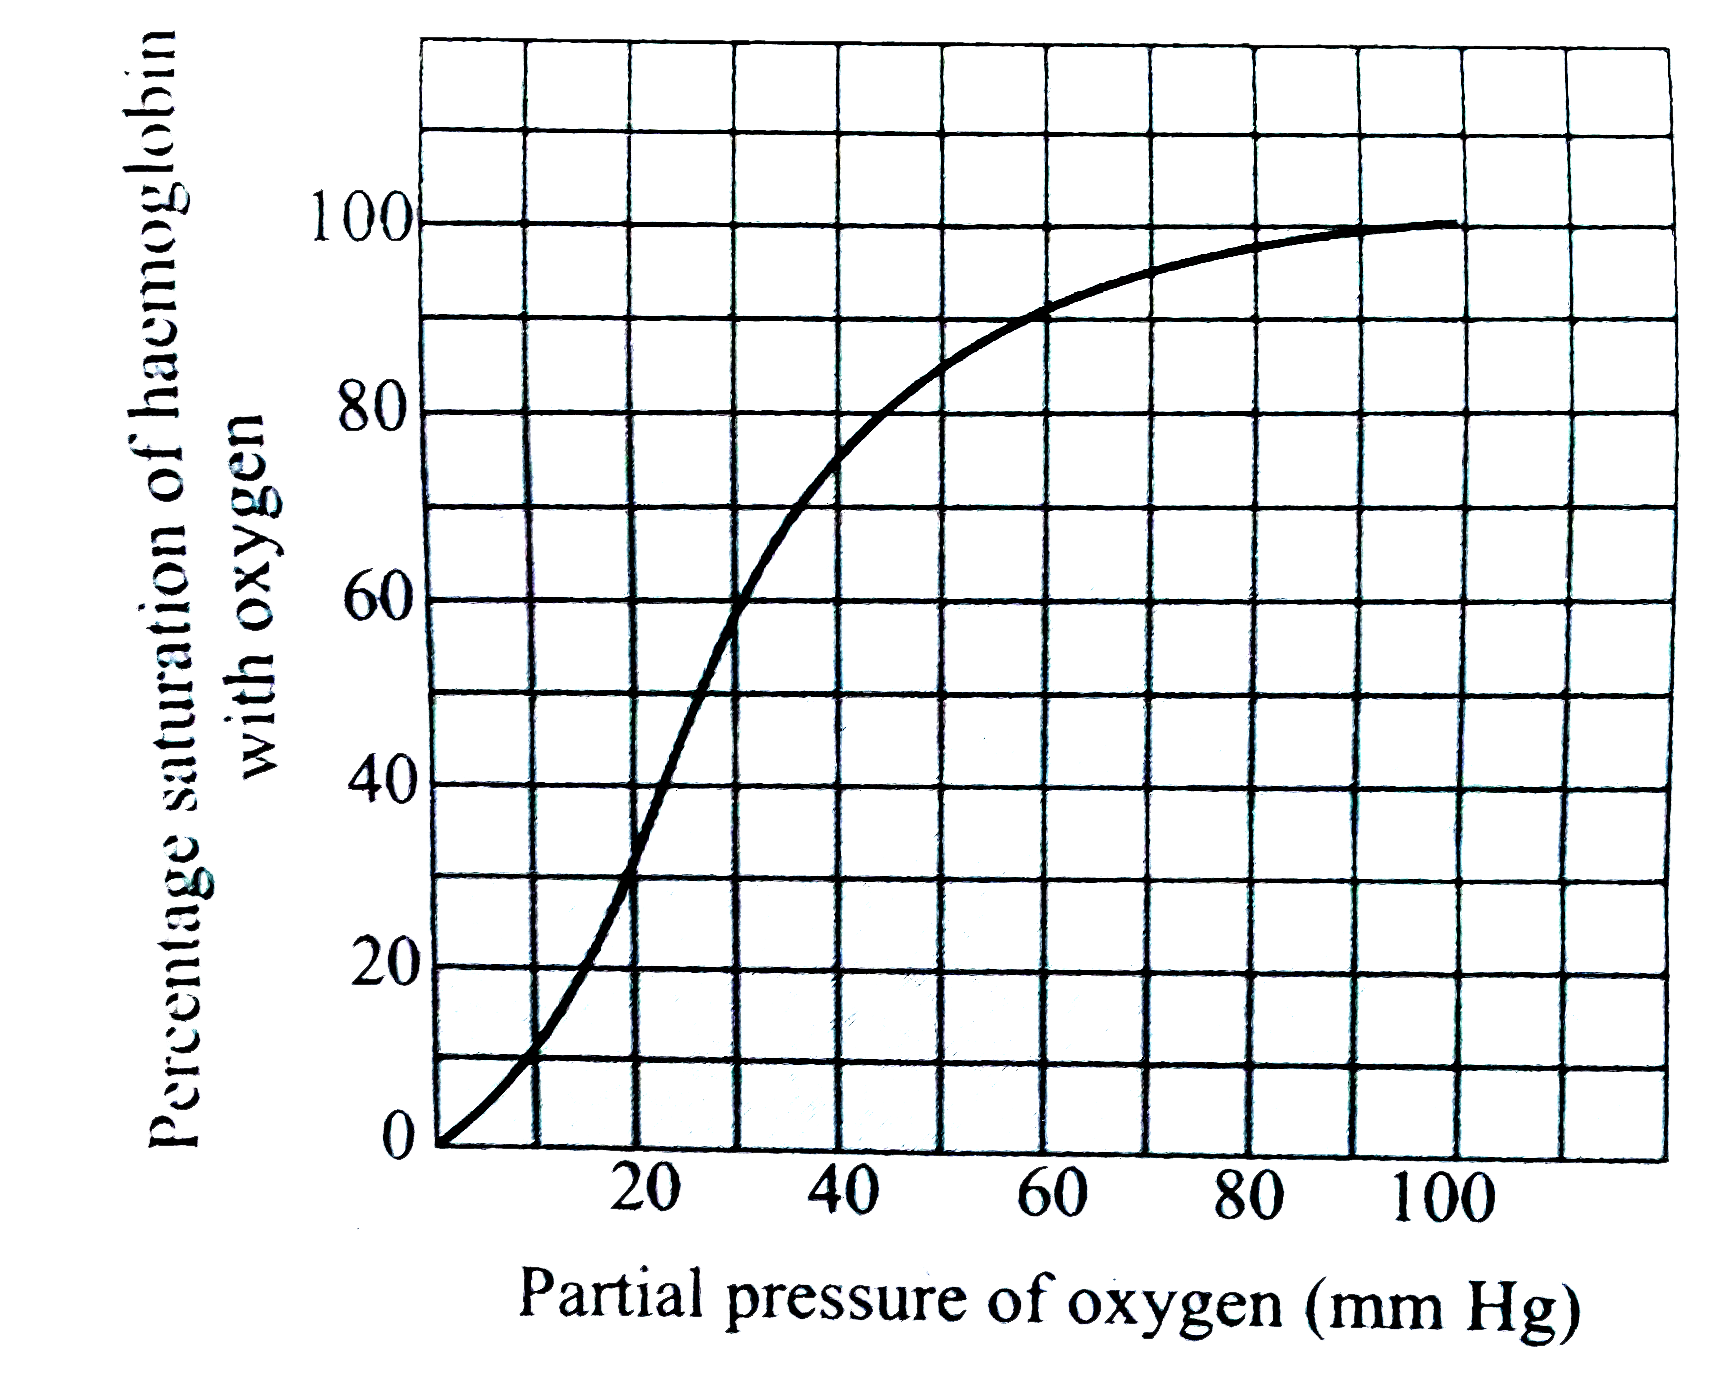 Shifting of the curve to right takes place in the case of